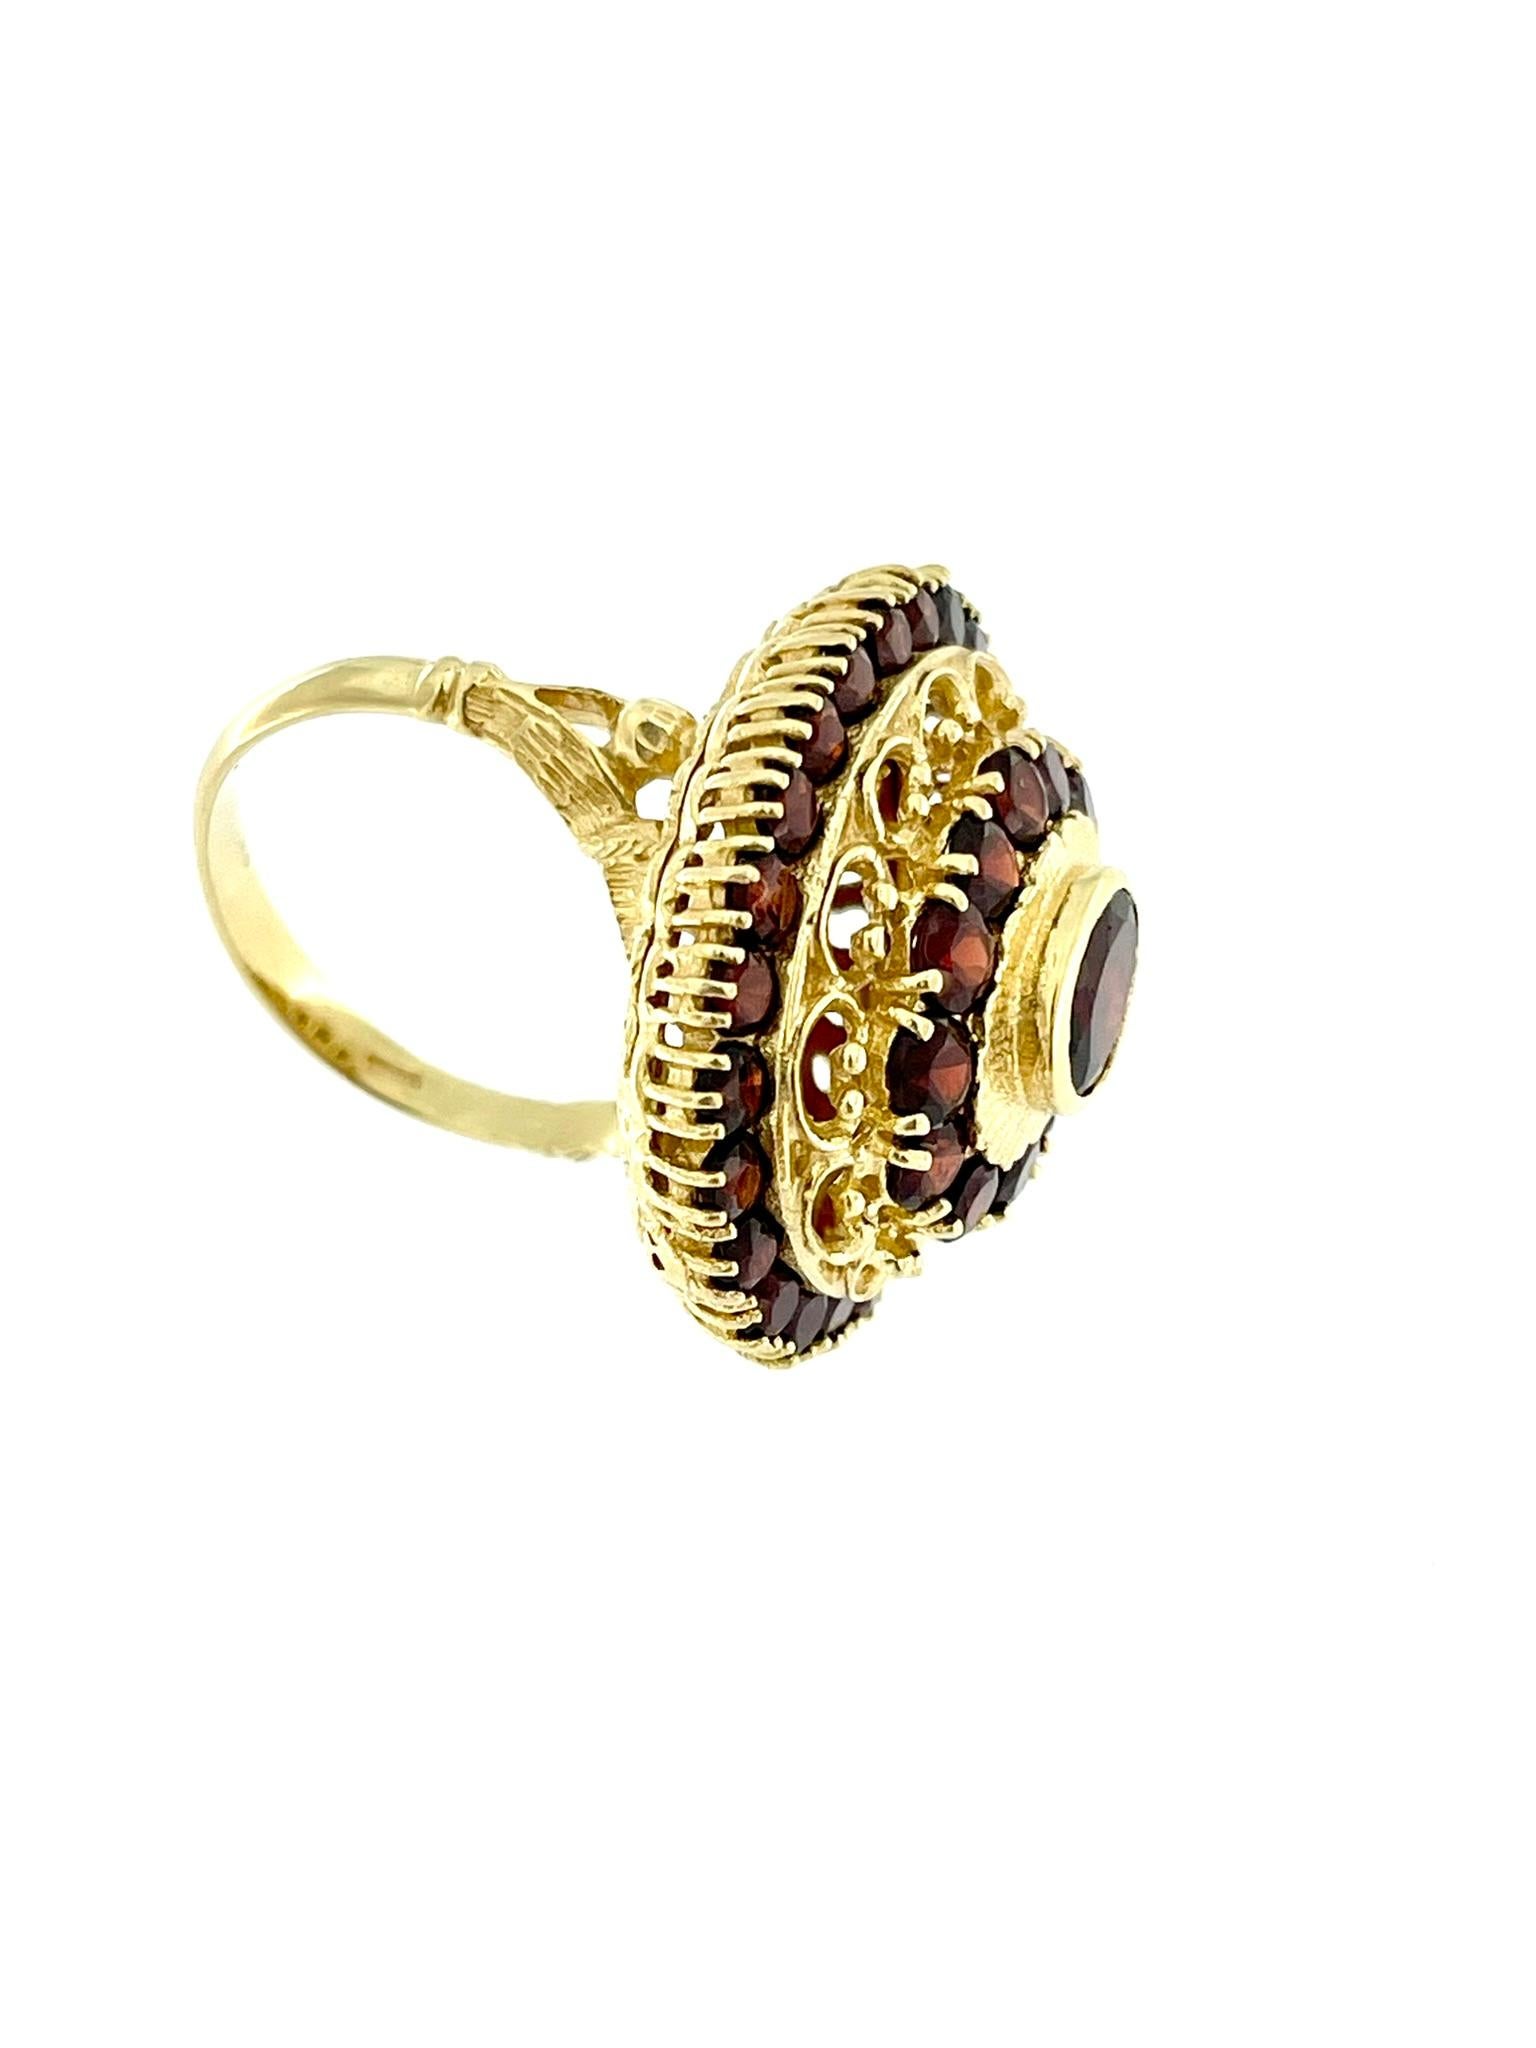 Belle-Epoque 18 karat Yellow Gold Princess Ring with Garnets For Sale 1